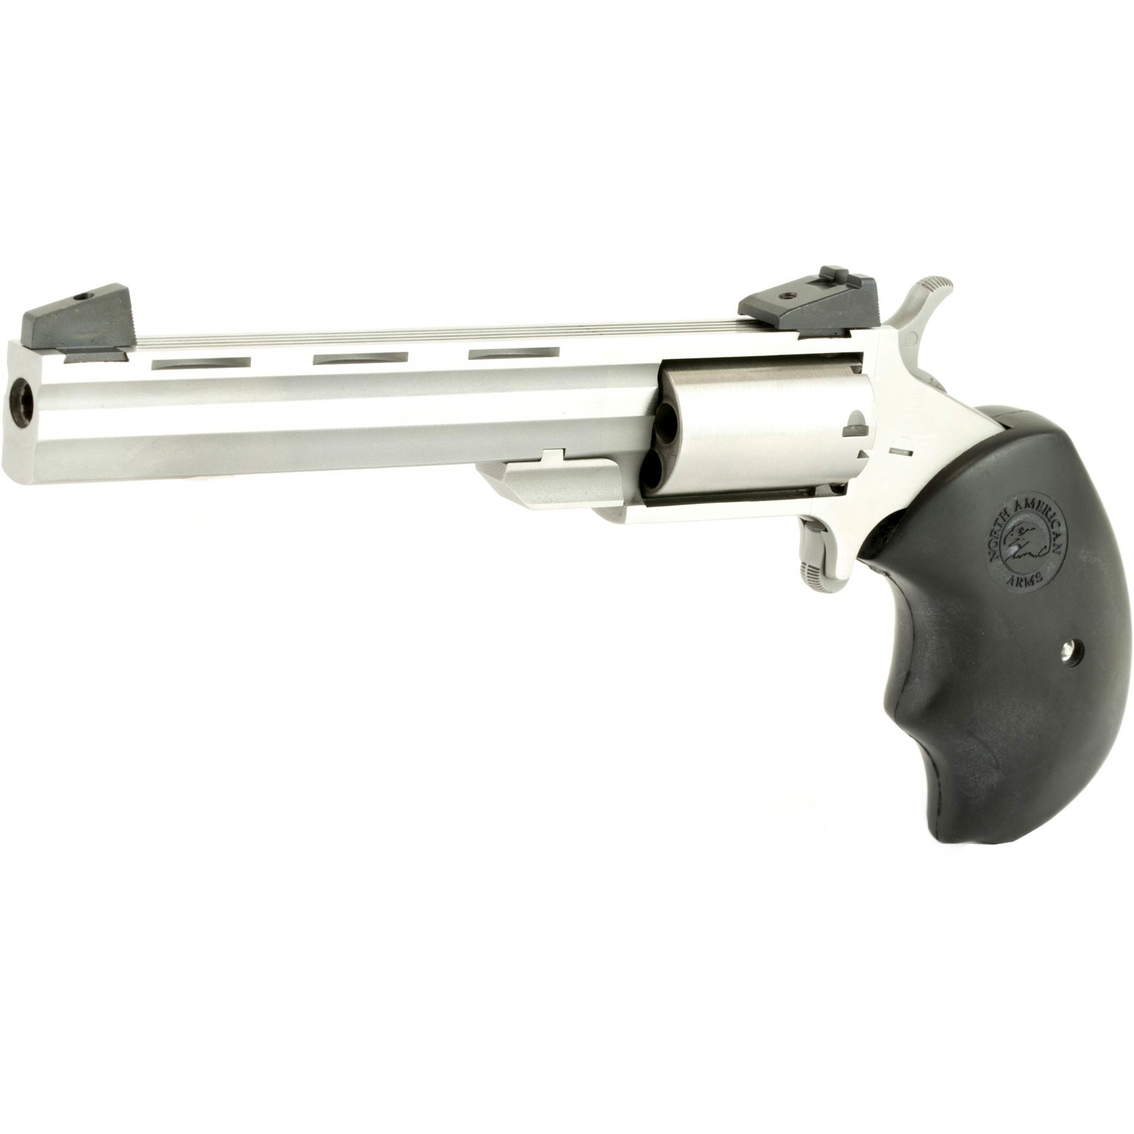 NAA Mini Master 22 WMR 22 LR 4 in. Barrel 5 Rds Revolver Stainless Steel AS - Image 3 of 3